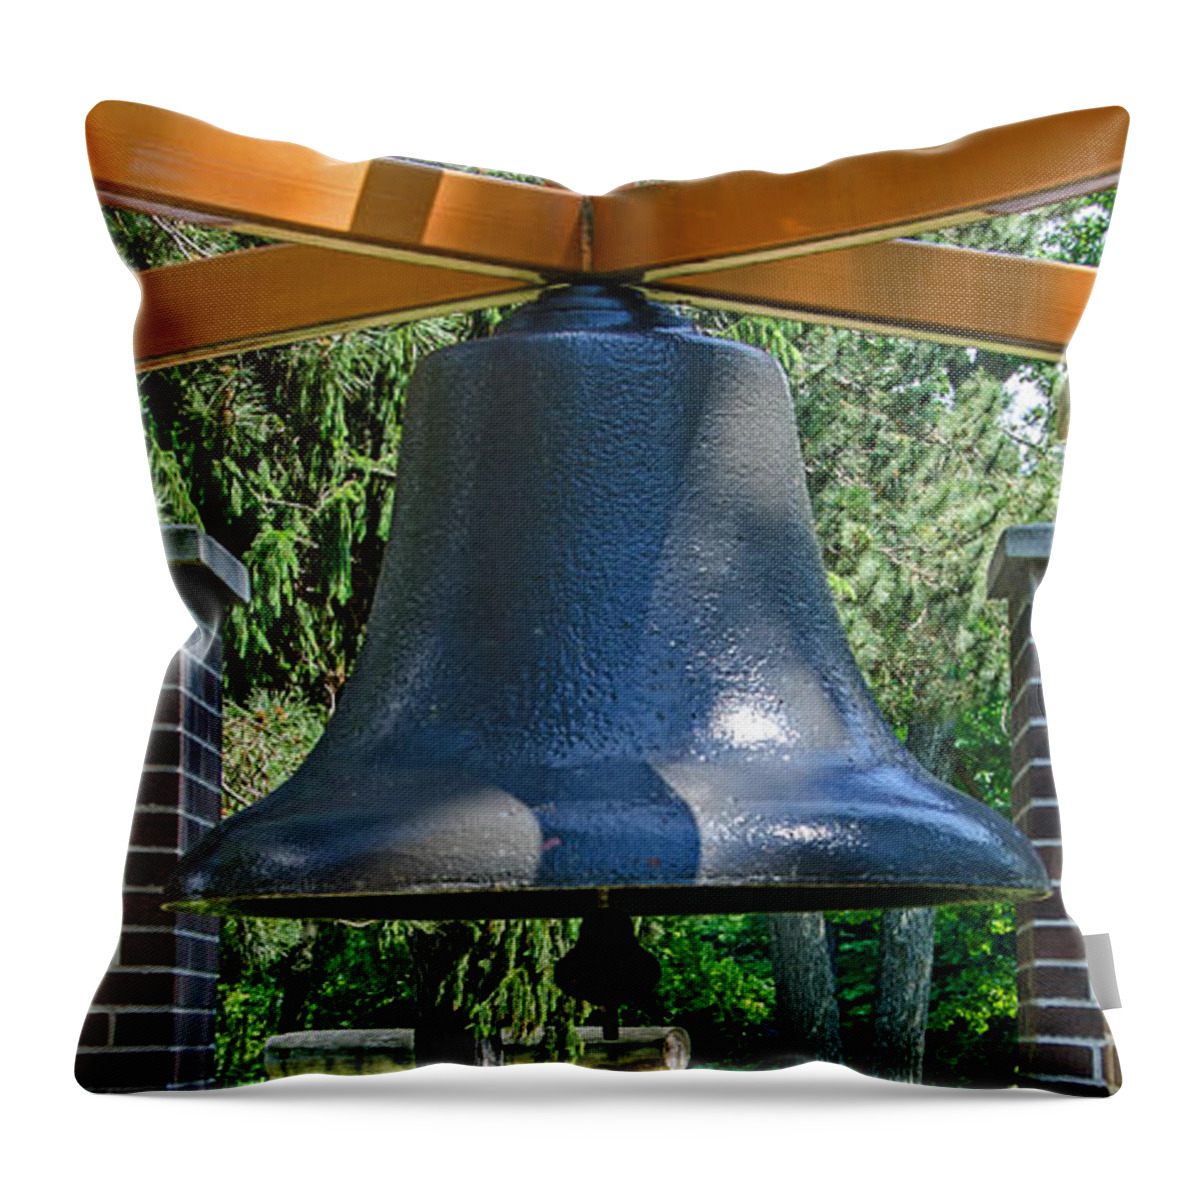 Bell Tower Throw Pillow featuring the photograph Original Fire Bell From The Superior Fire Dept In Wisconsin 1892 by Susan McMenamin